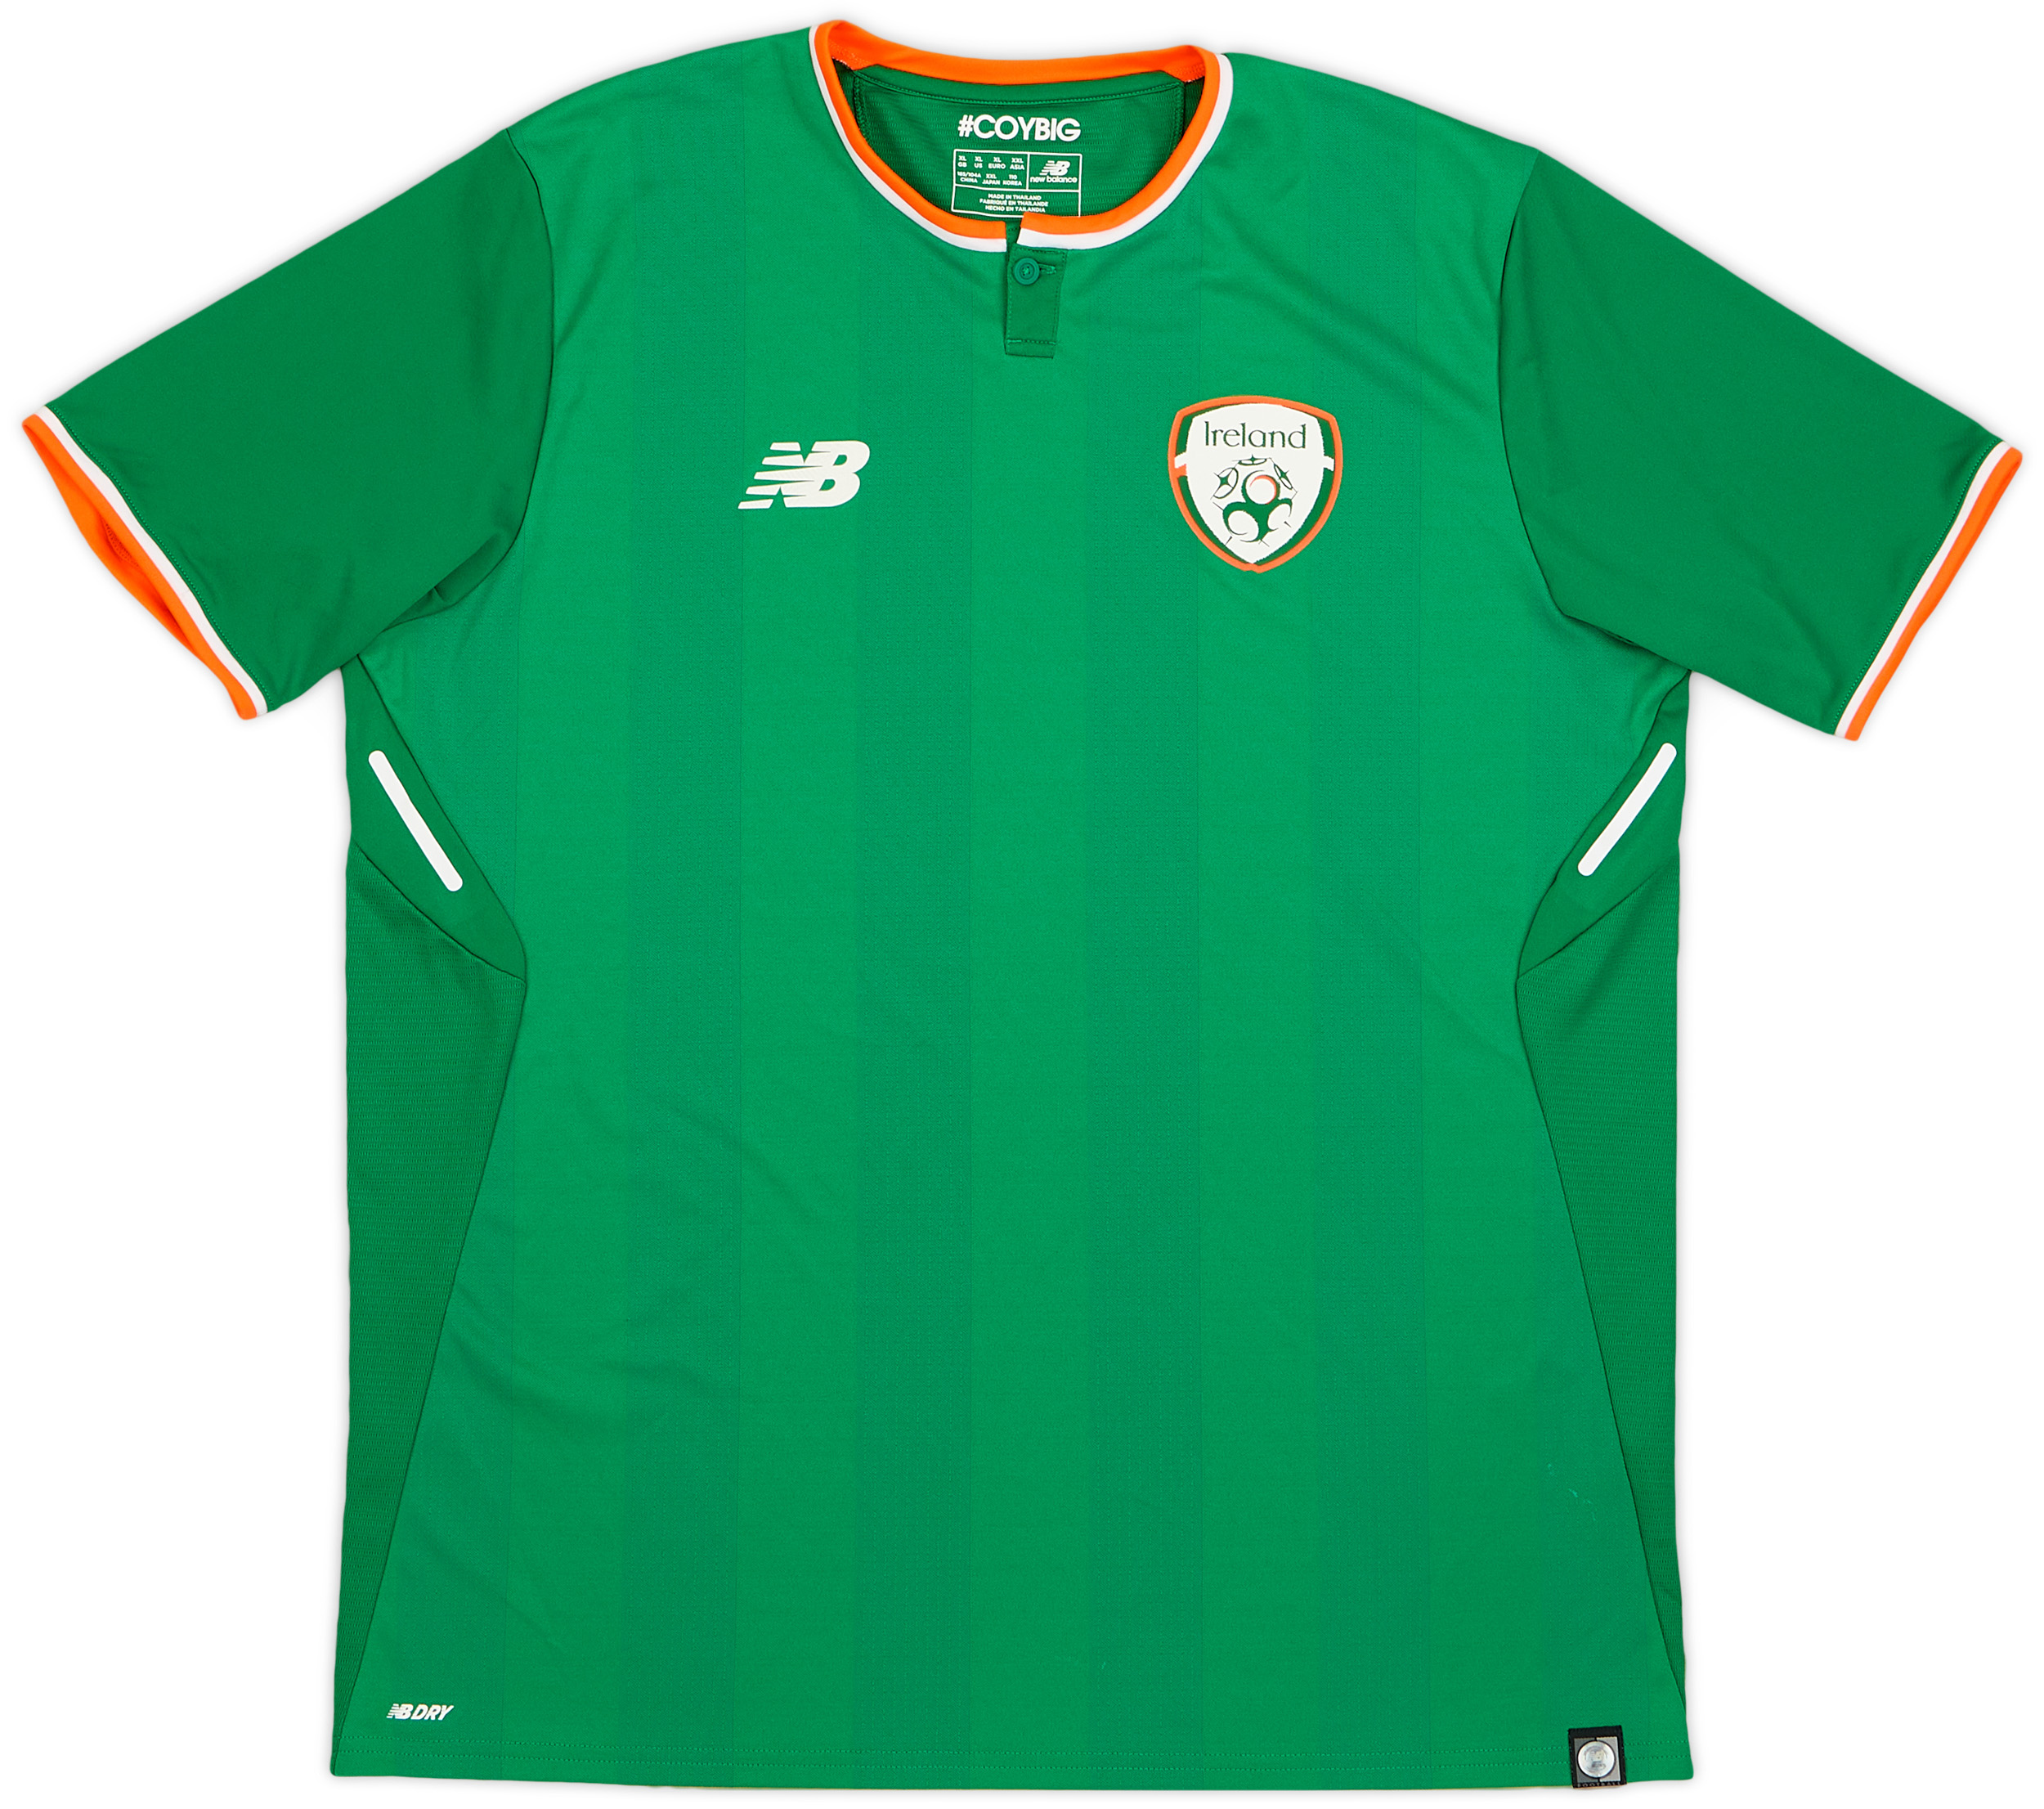 2017-18 Republic of Ireland Player Issue Home Shirt - 9/10 - ()